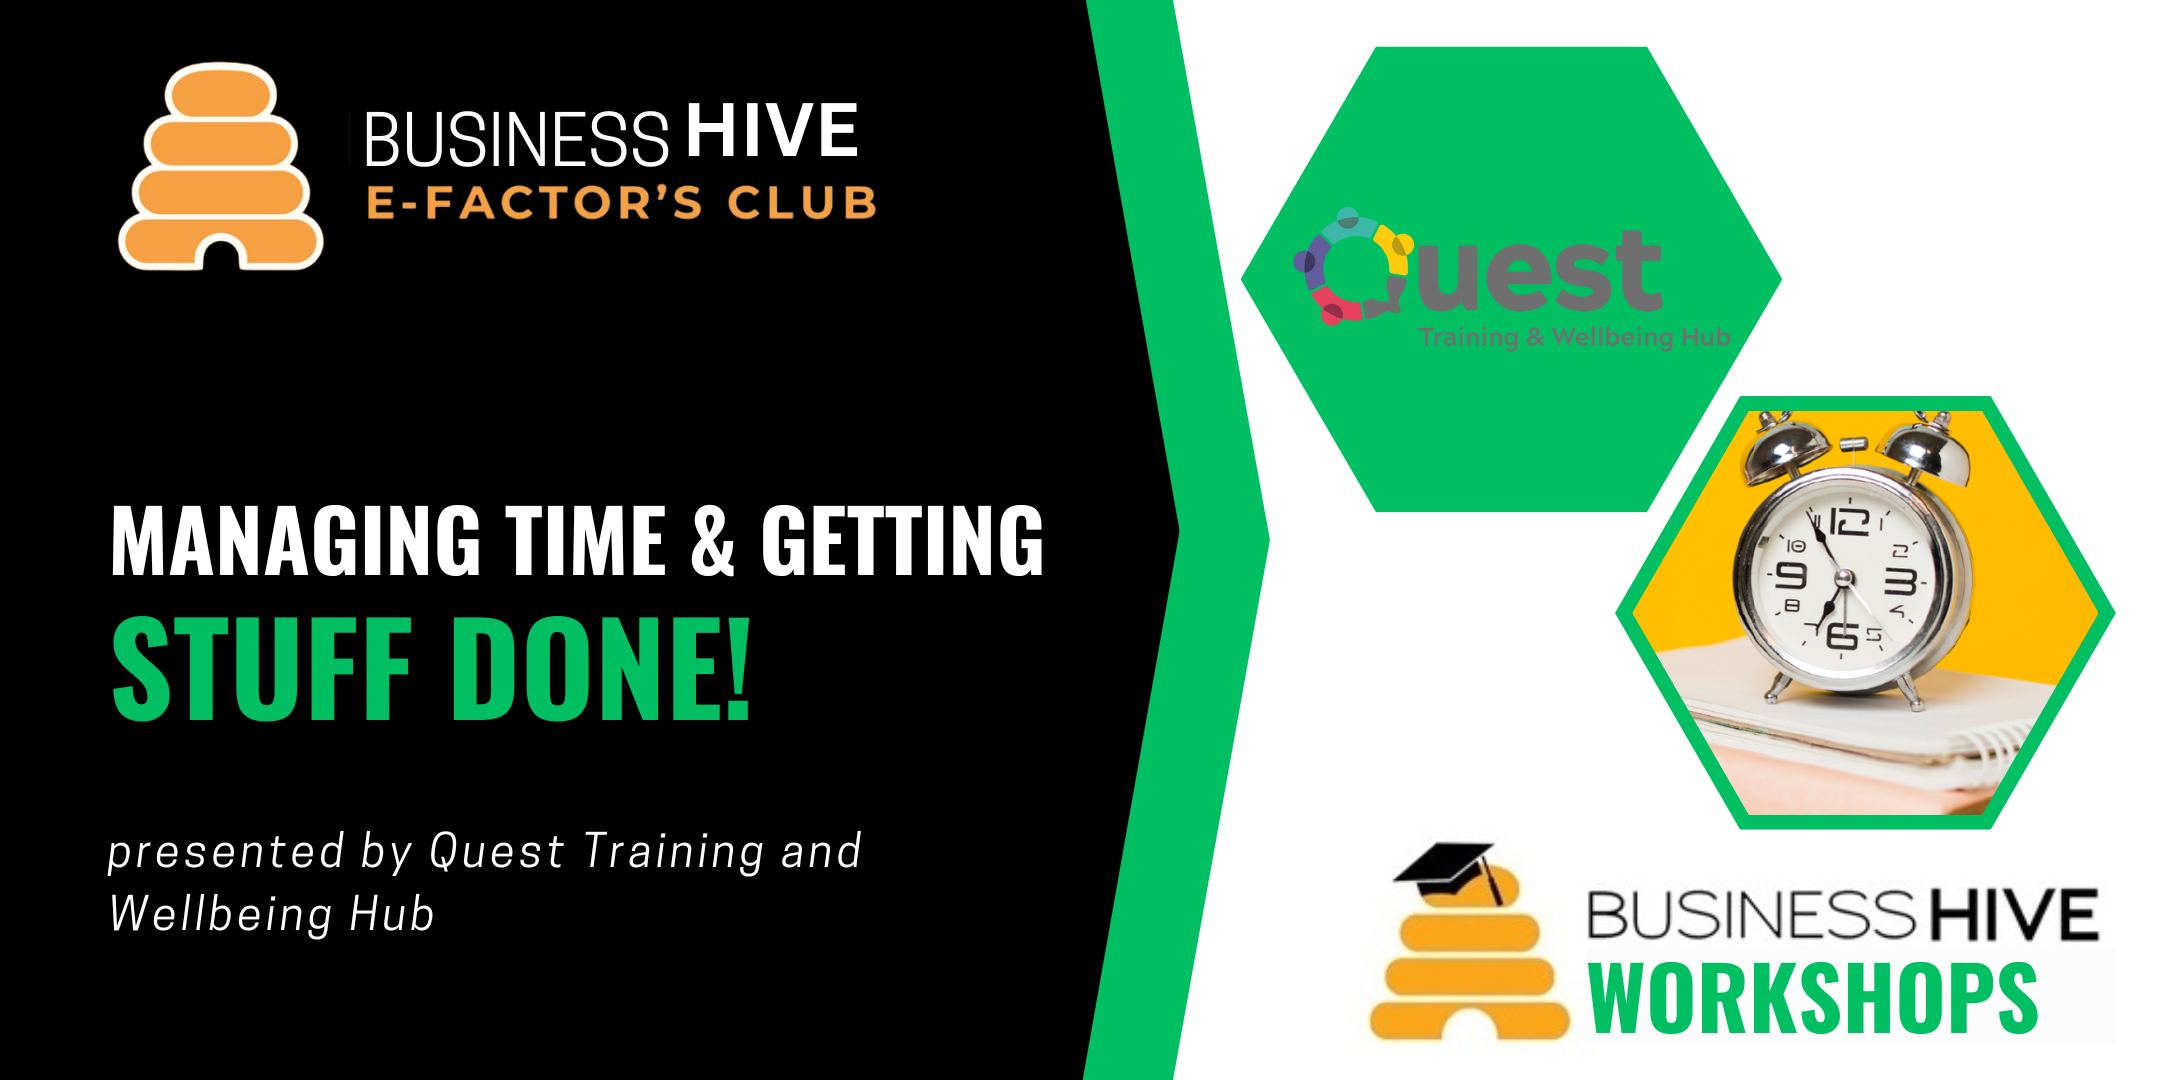 Banner for a workshop by Business Hive and Quest Training and Wellbeing Hub, titled "Managing Time & Getting Stuff Done!" featuring a clock and book image, with logos for Business Hive, Quest, and Business Hive Workshops. Learn essential time management skills to boost your productivity!